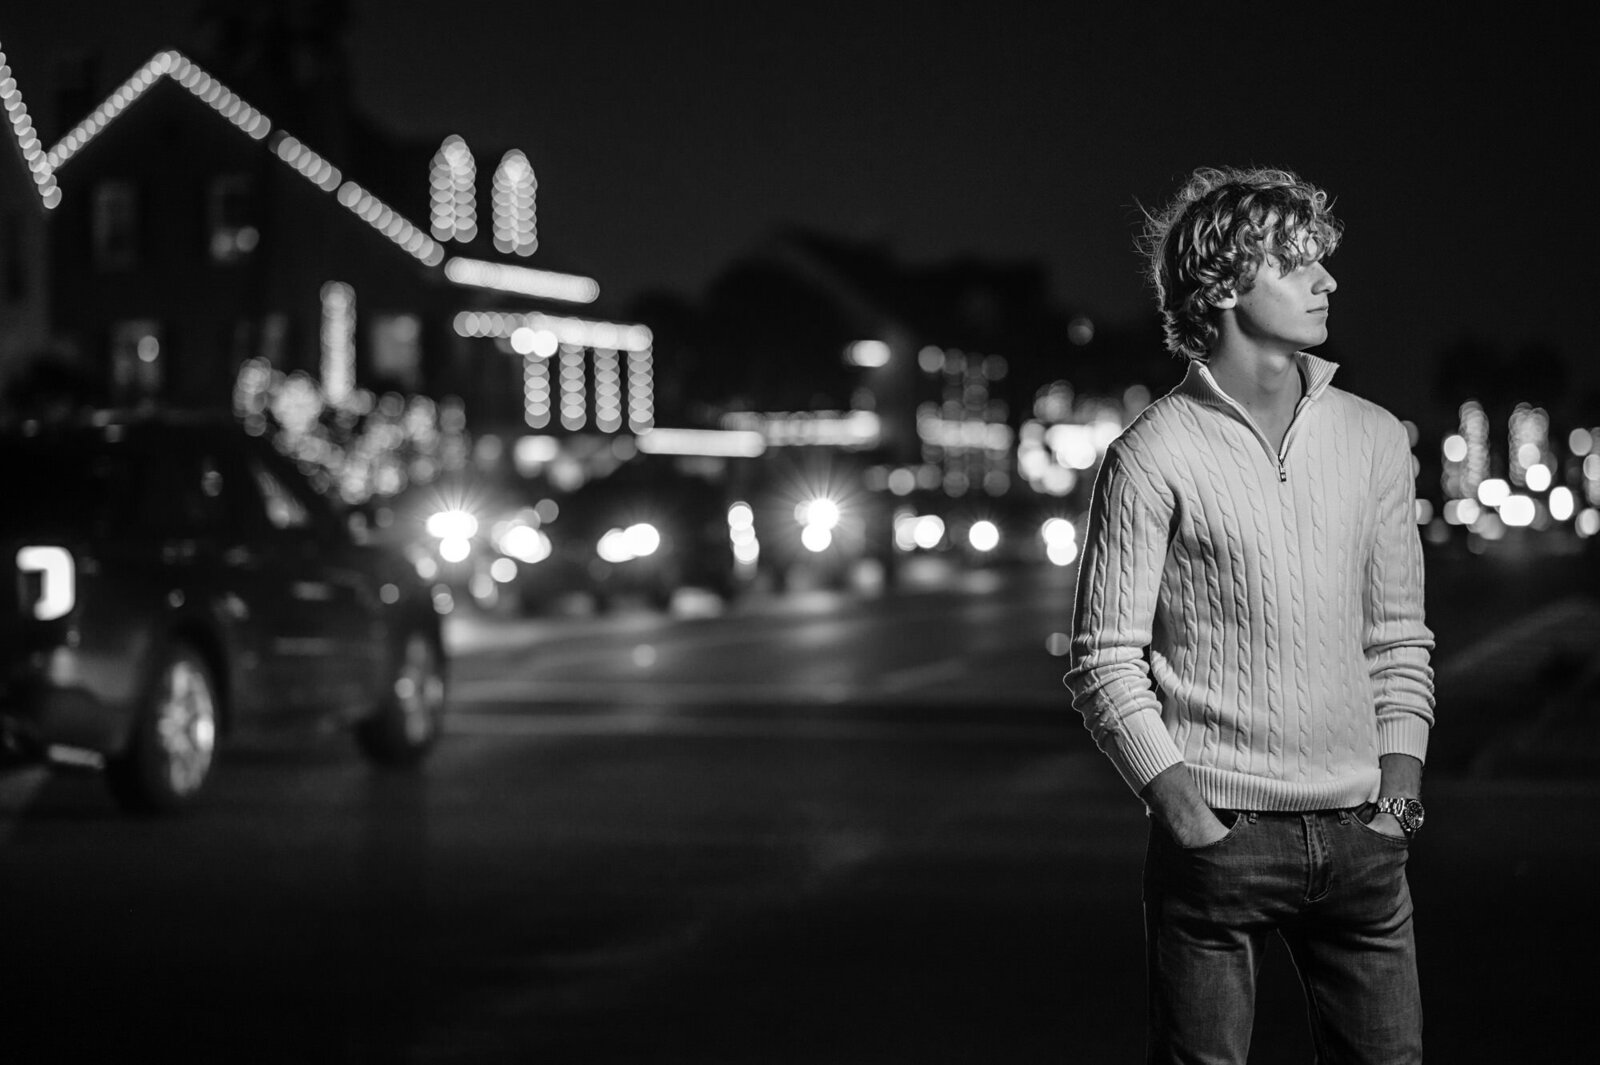 Downtown St. Augustine senior picture with lights at dark